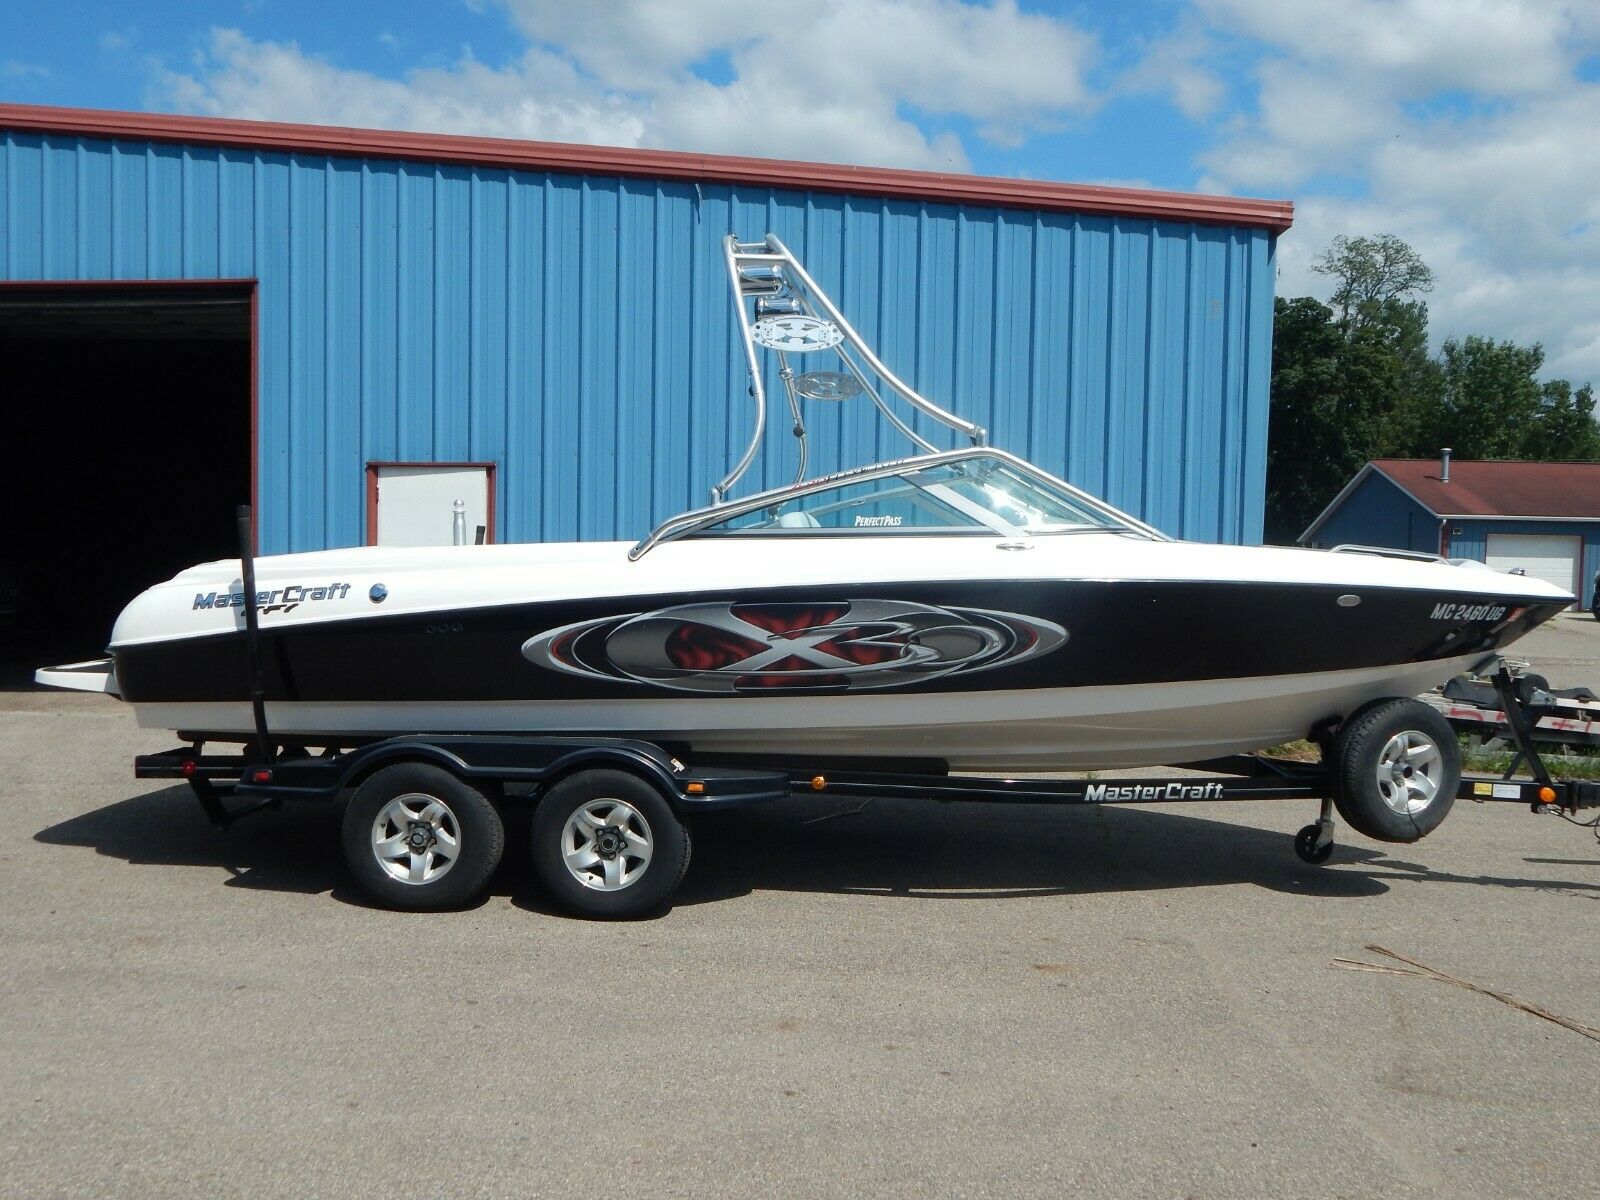 MasterCraft X30 2003 for sale for $24,999 - Boats-from-USA.com